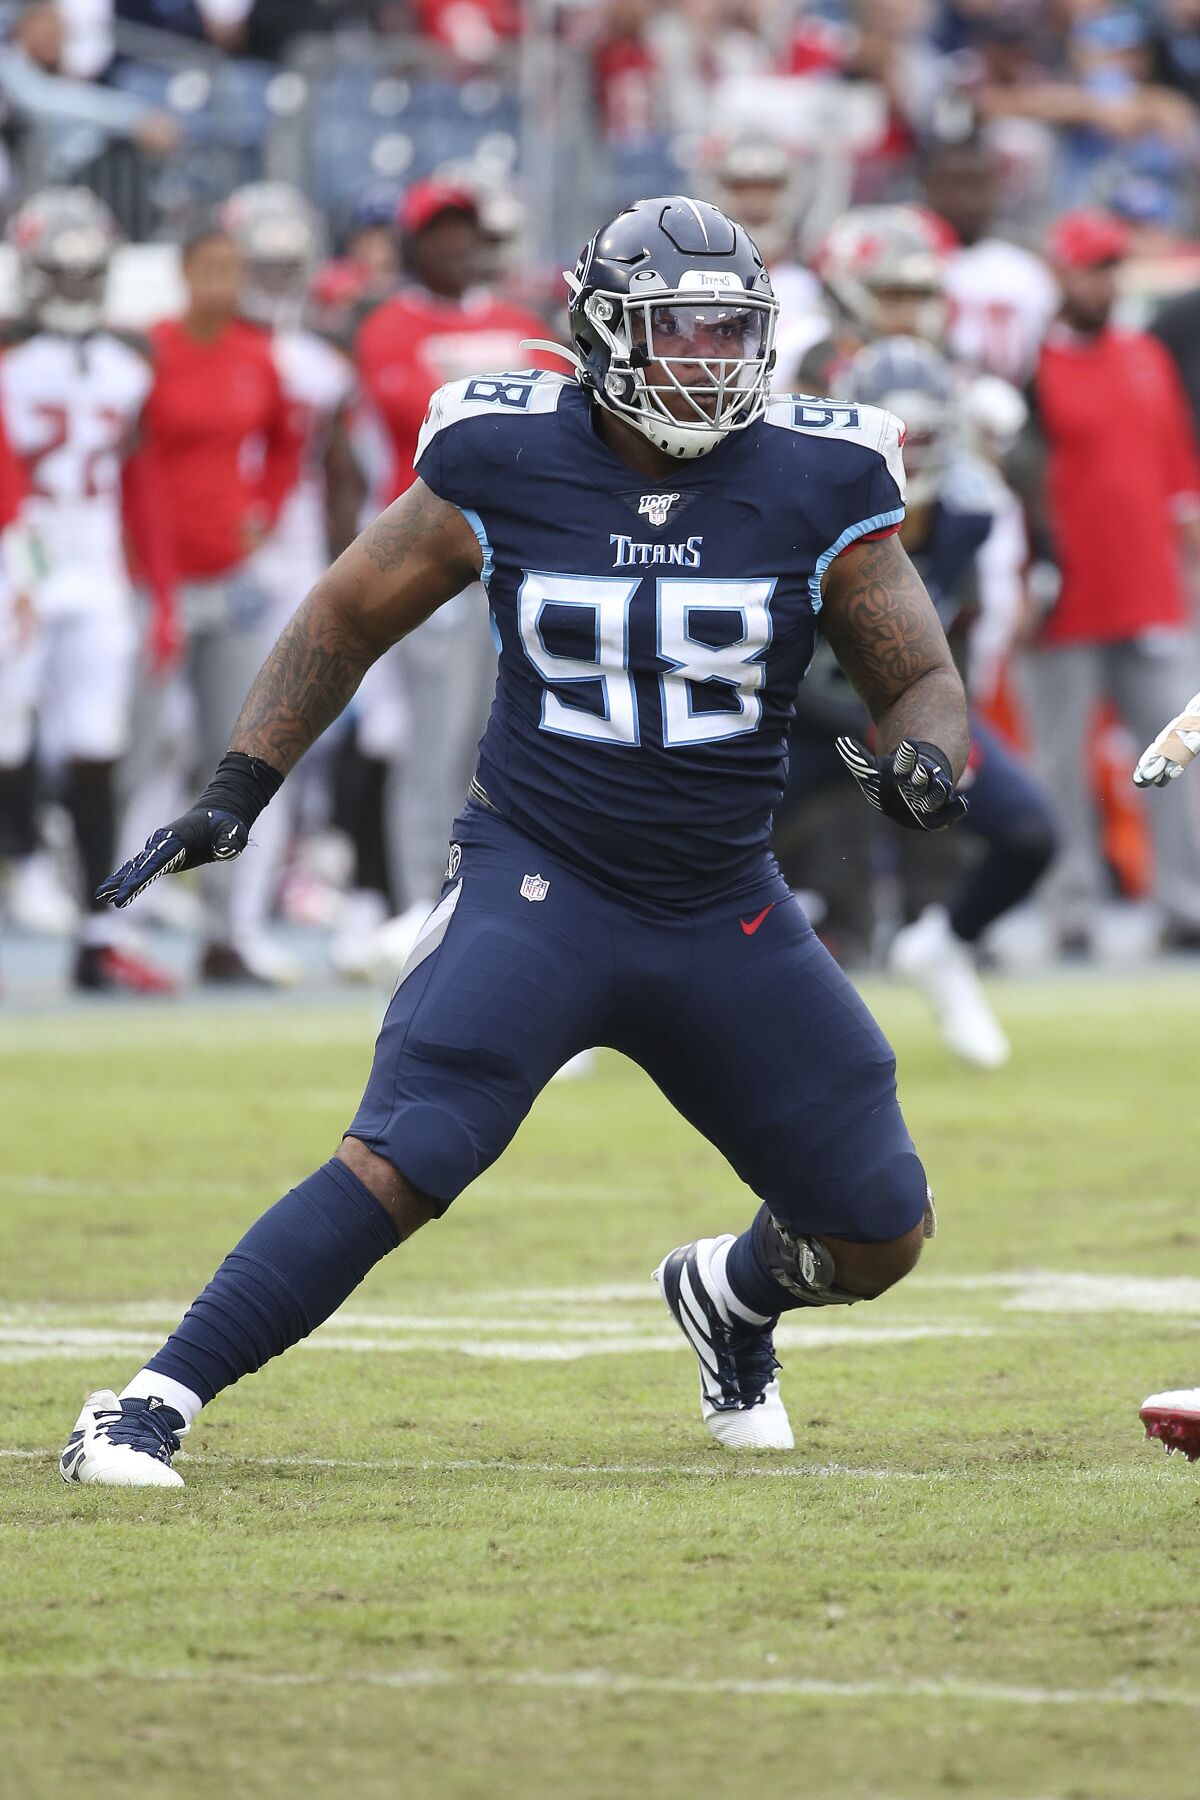 FILE - In this Oct.27, 2019, file photo, Tennessee Titans defensive tackle Jeffery Simmons (98) plays during an NFL football game against the Tampa Bay Buccaneers in Nashville, Tenn. Simmons, DaQuan Jones and Harold Landry are ready for the challenge of filling the hole left by Tennessee trading five-time Pro Bowl defensive lineman Jurrell Casey to Denver in March. (AP Photo/Michael Zito, File)